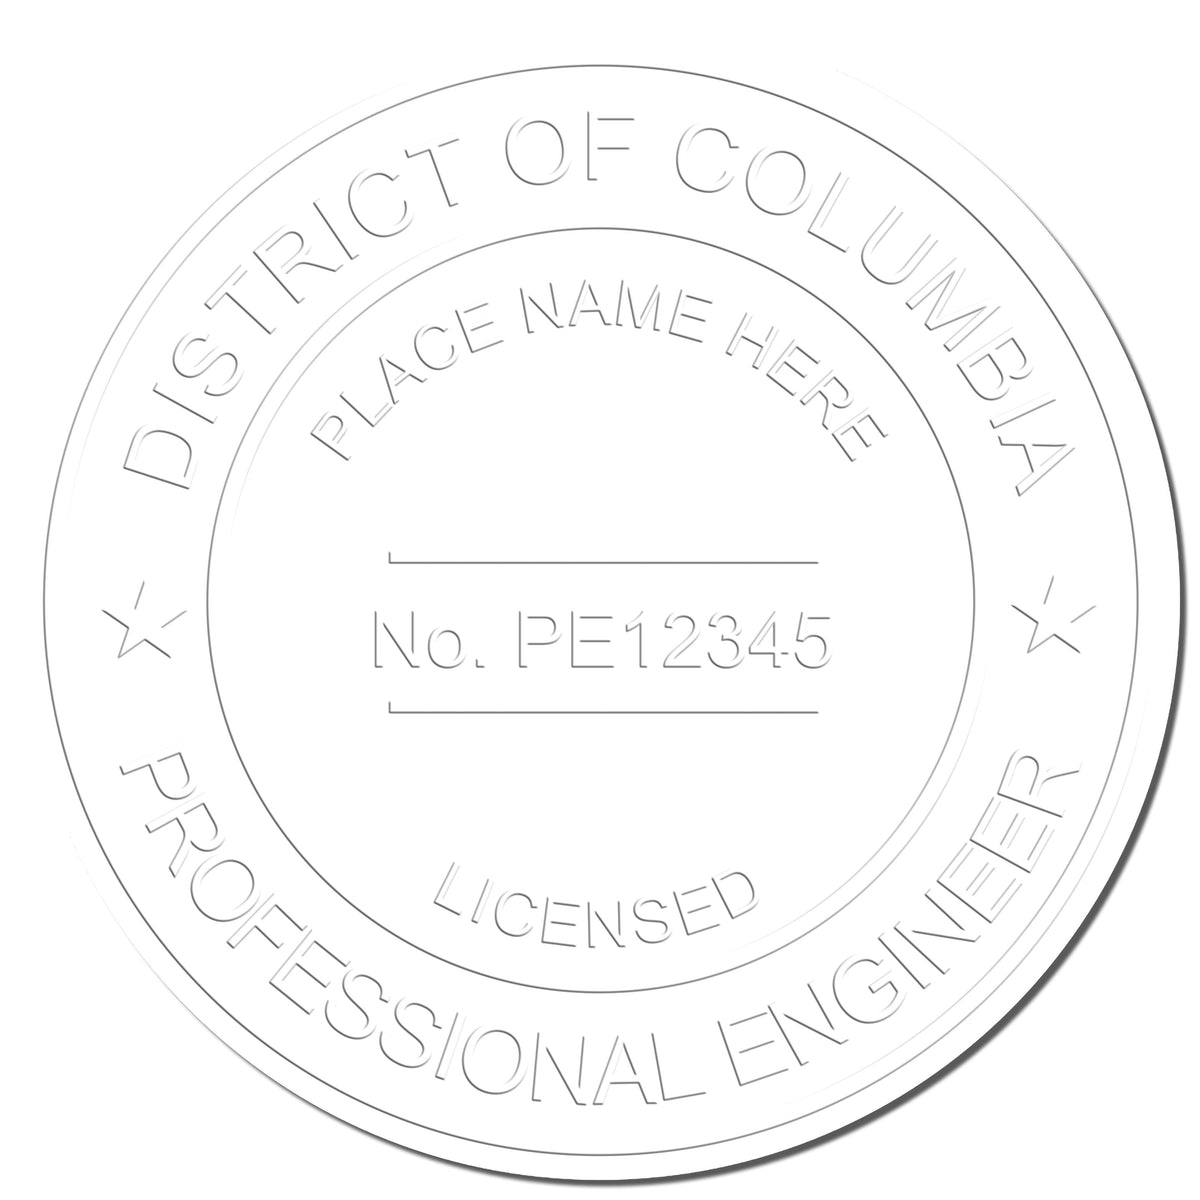 The Soft District of Columbia Professional Engineer Seal stamp impression comes to life with a crisp, detailed photo on paper - showcasing true professional quality.